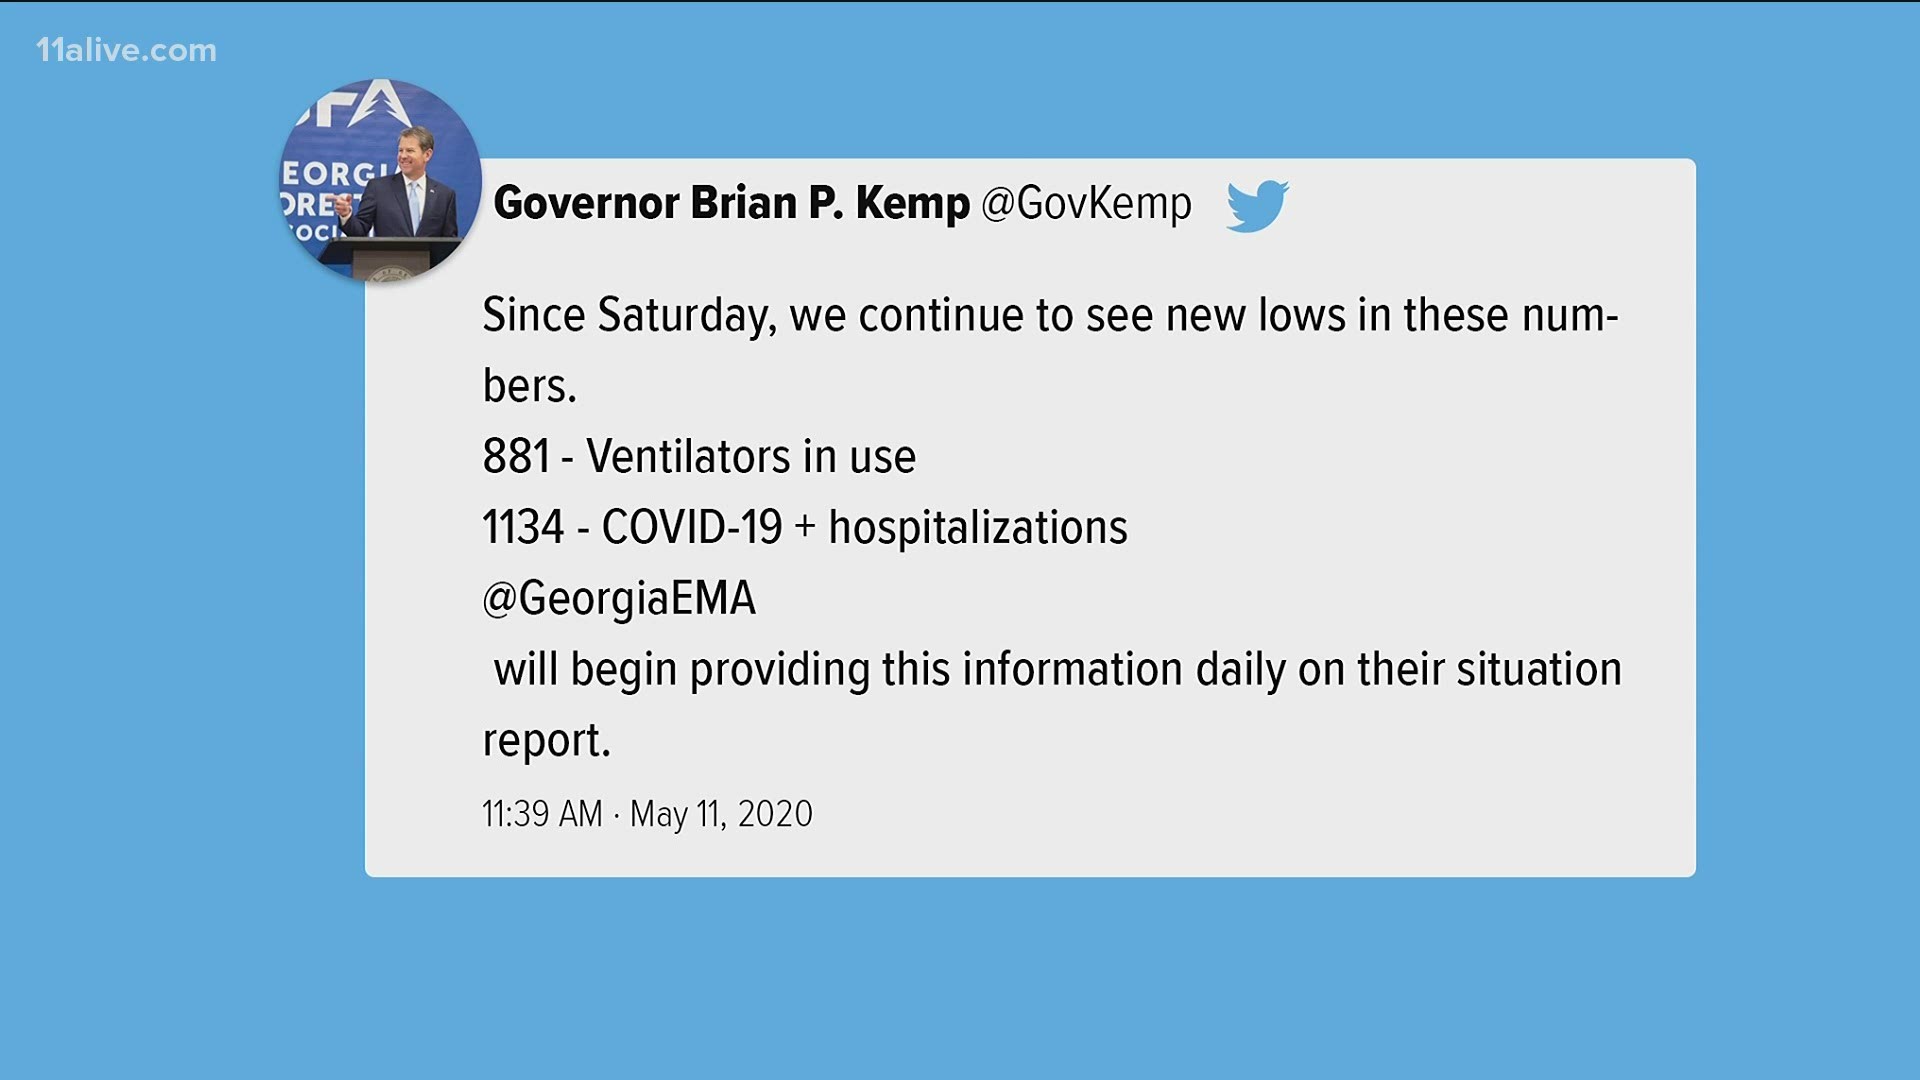 Gov. Kemp tweeted positive messages about where Georgia stands in its fight against COVID-19.